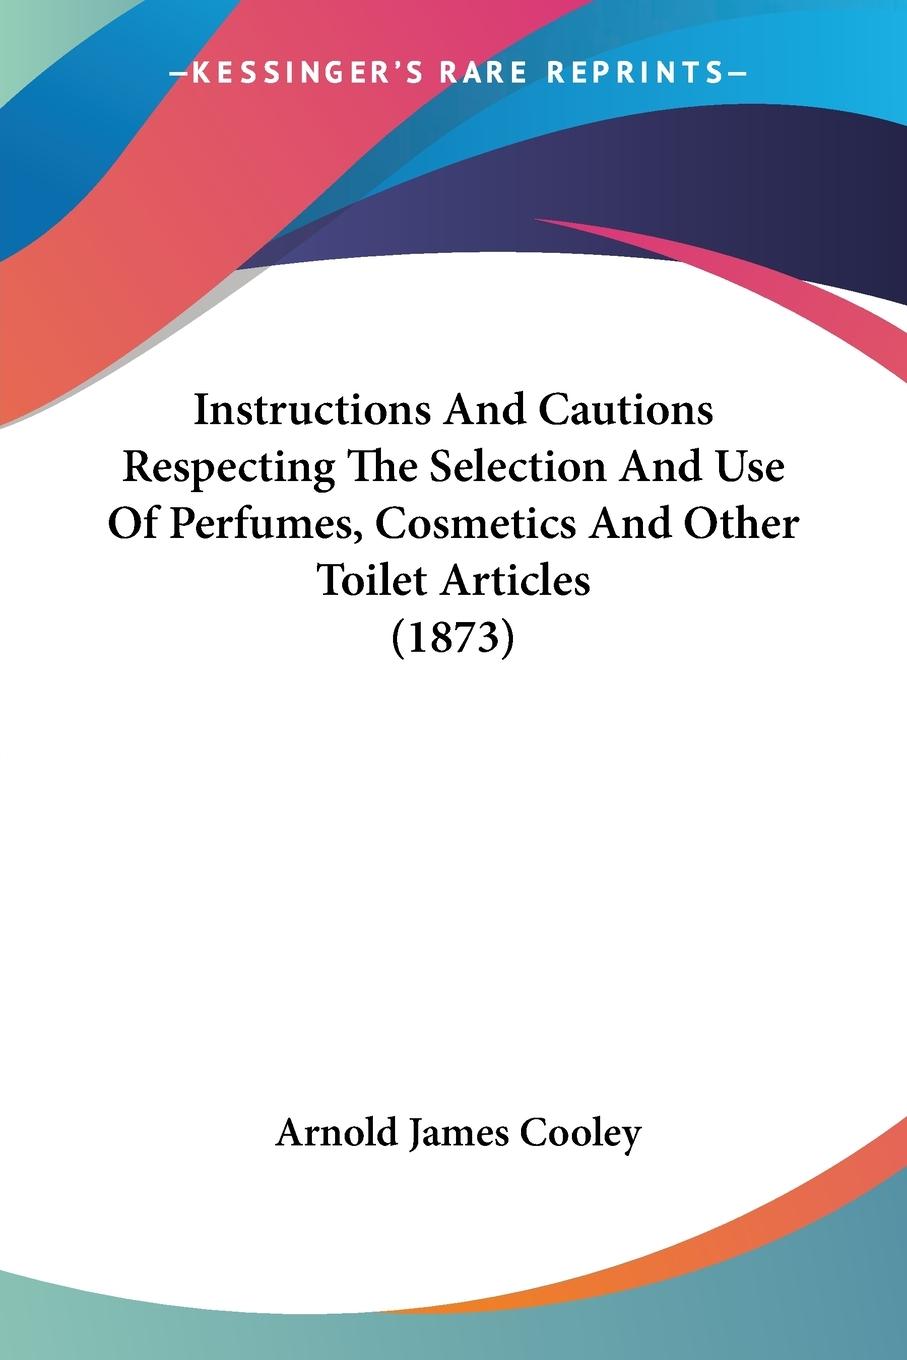 Instructions And Cautions Respecting The Selection And Use Of Perfumes, Cosmetics And Other Toilet Articles (1873) - Cooley, Arnold James